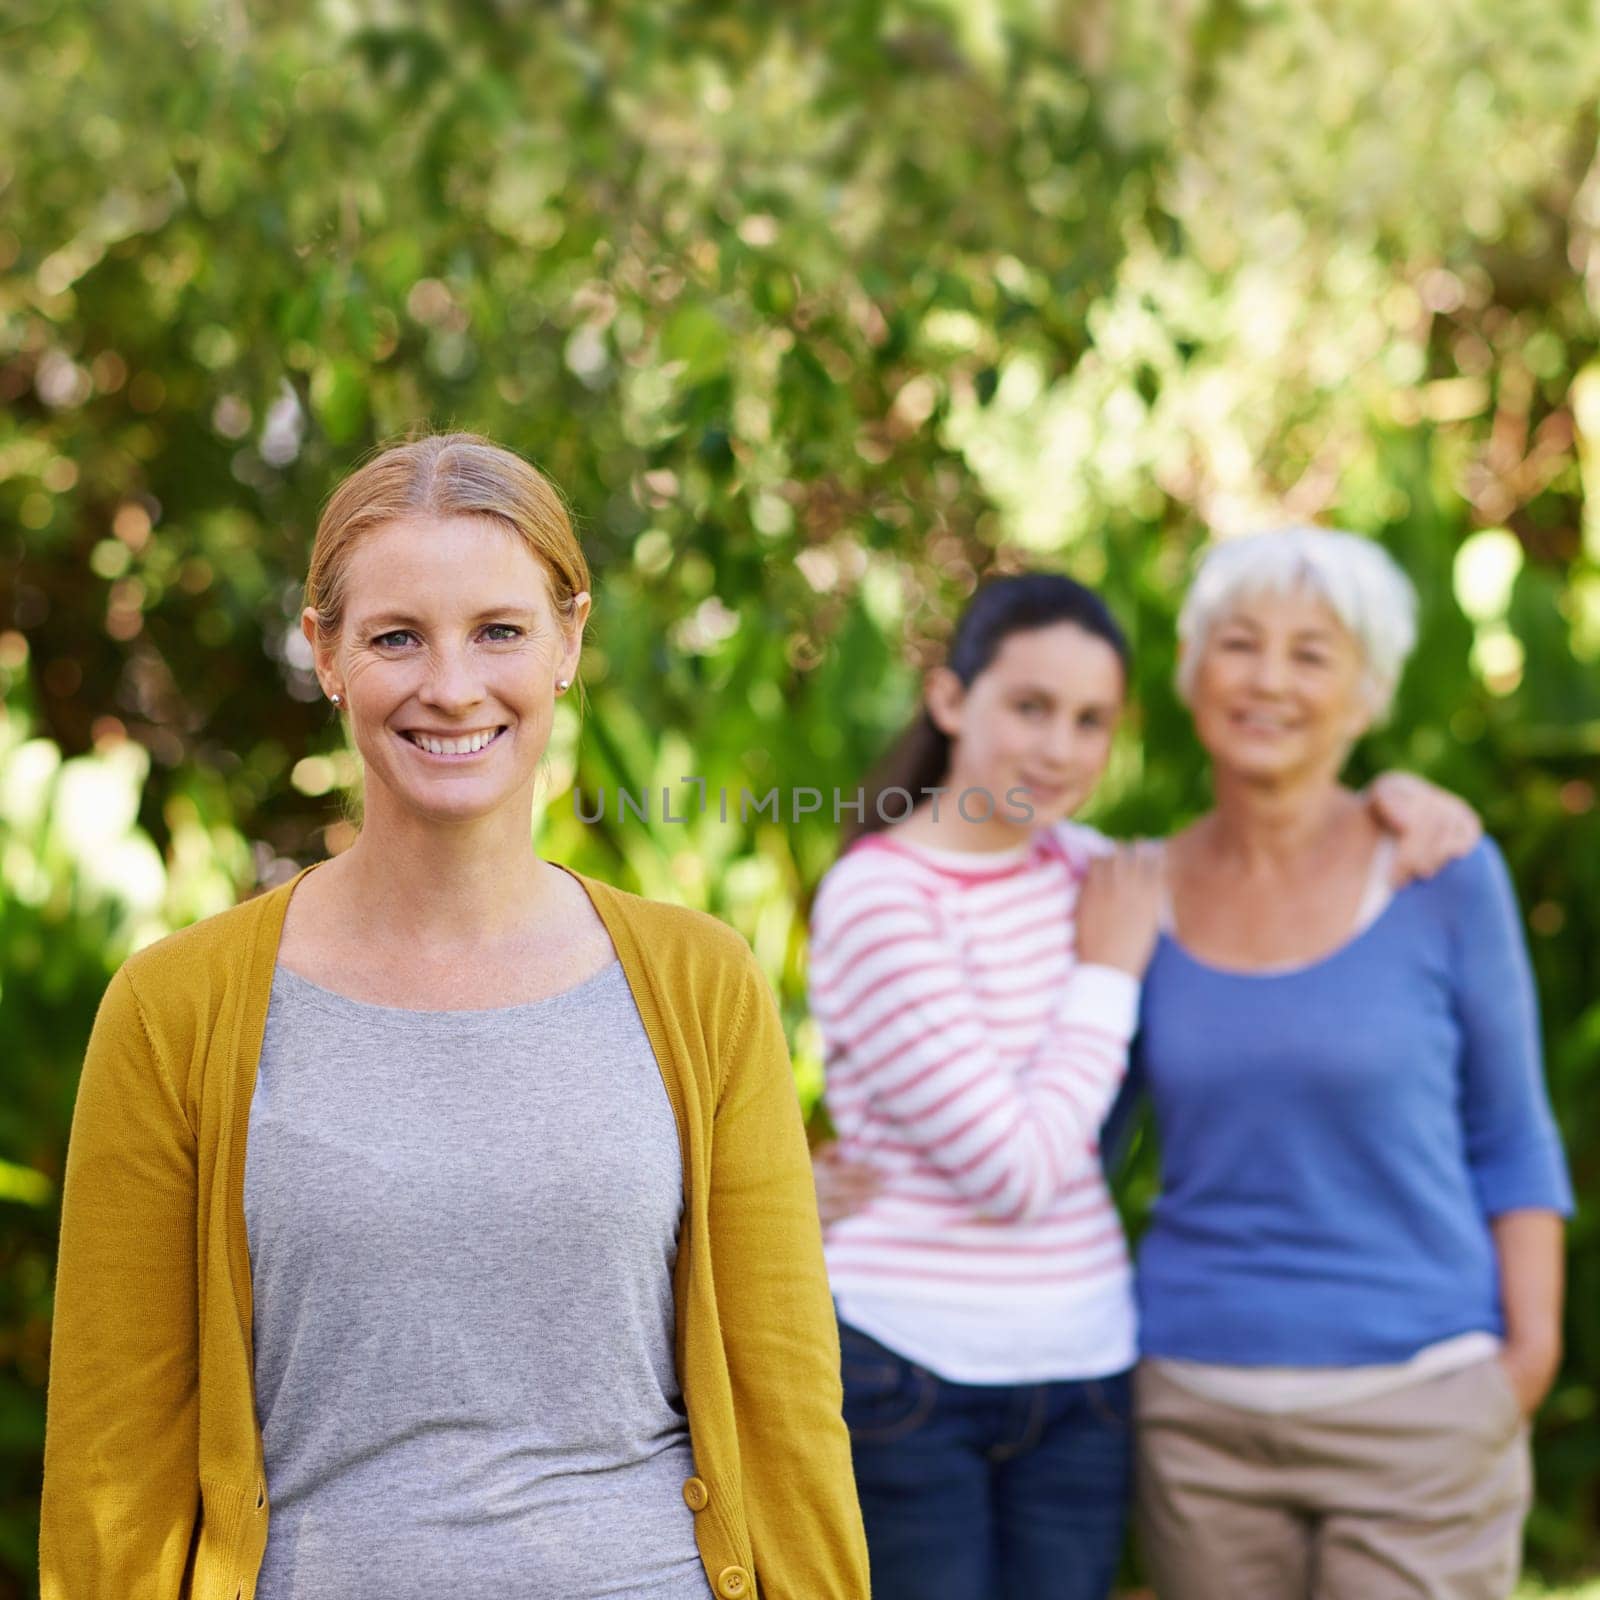 Nature, portrait and woman with kid and grandmother in outdoor park, field or garden together. Happy, smile and female person with girl child and senior mother in retirement in backyard in Canada